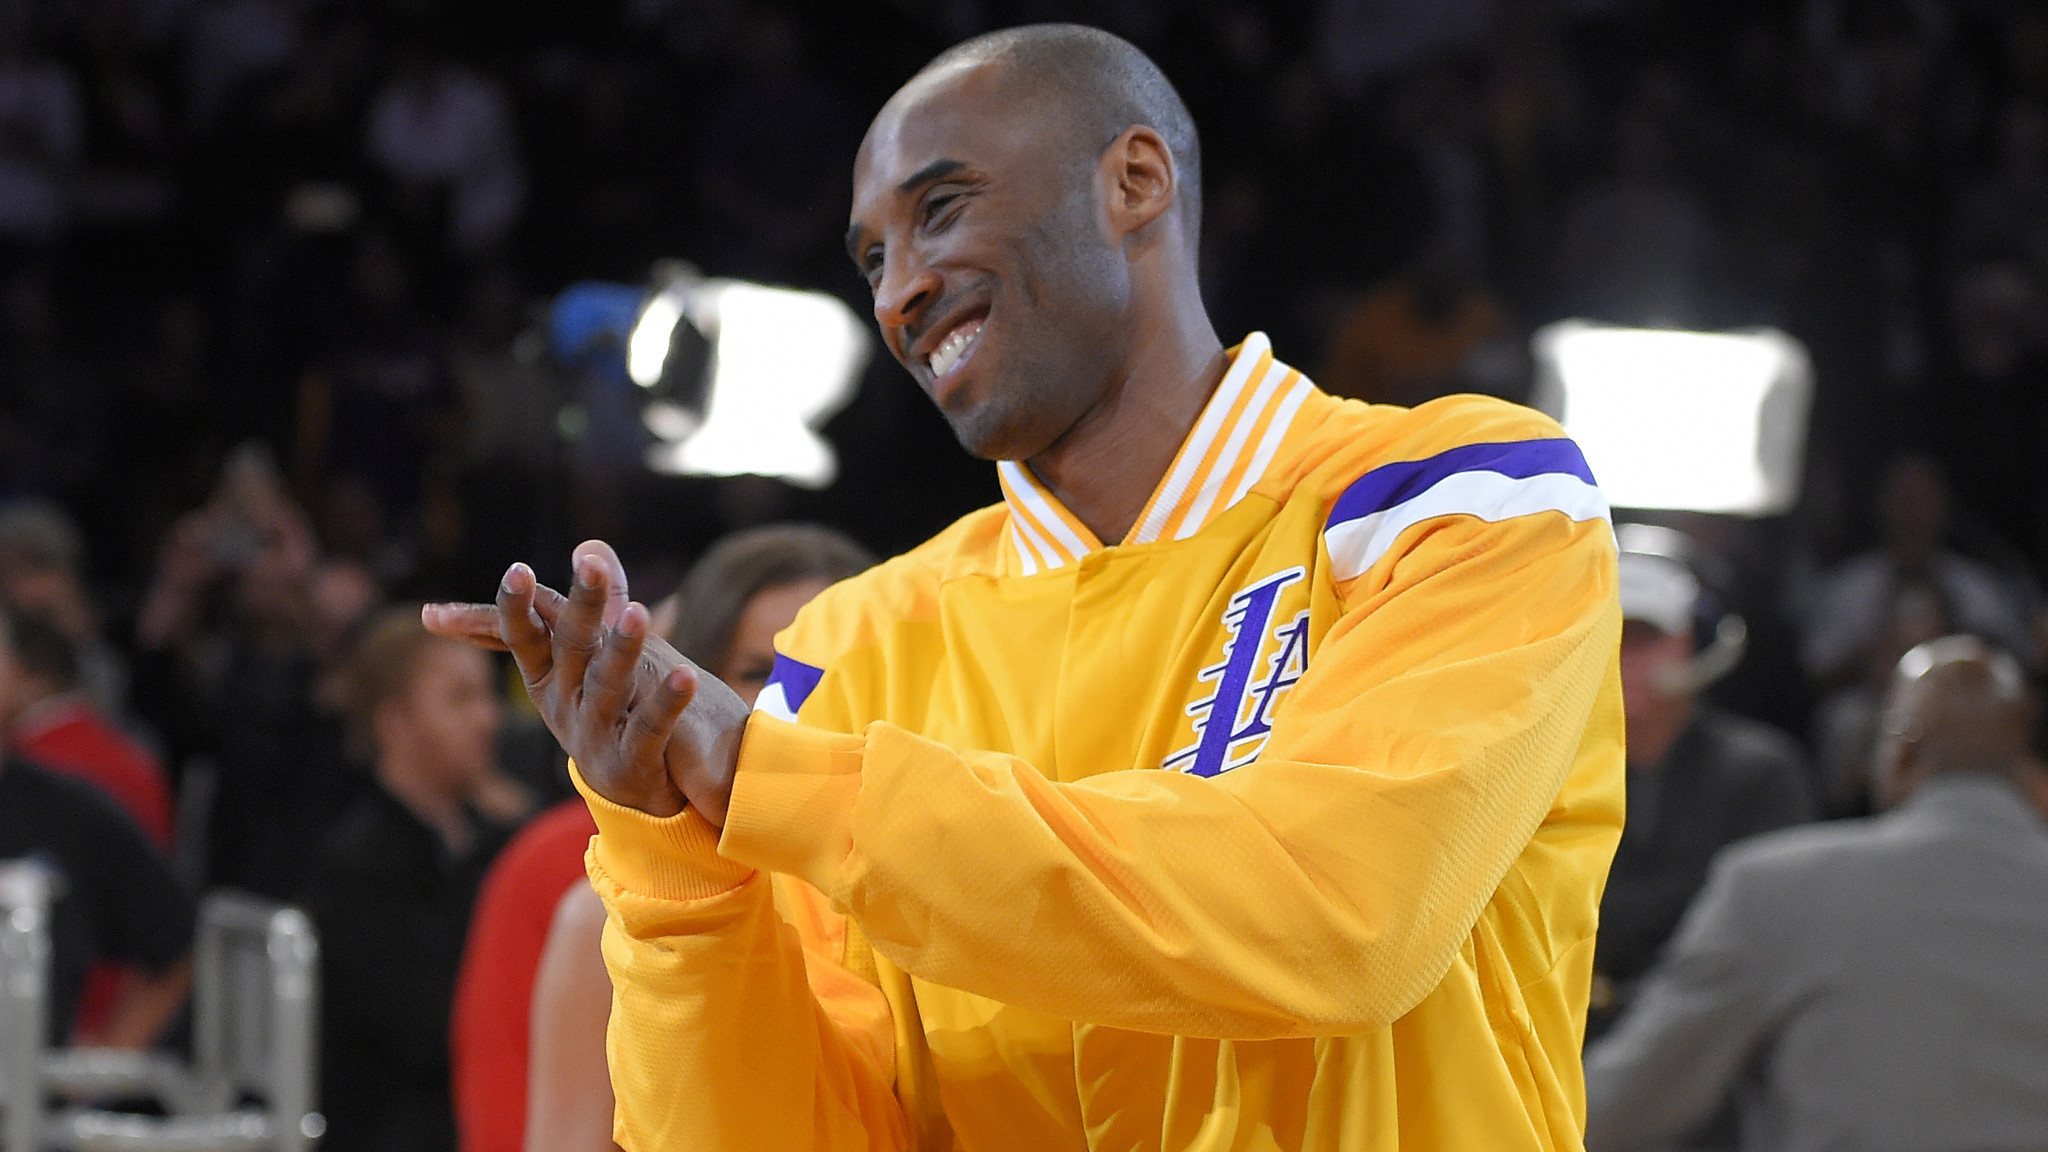 If Kobe Bryant retired, Lakers would have significant cap space - LA Times2048 x 1152